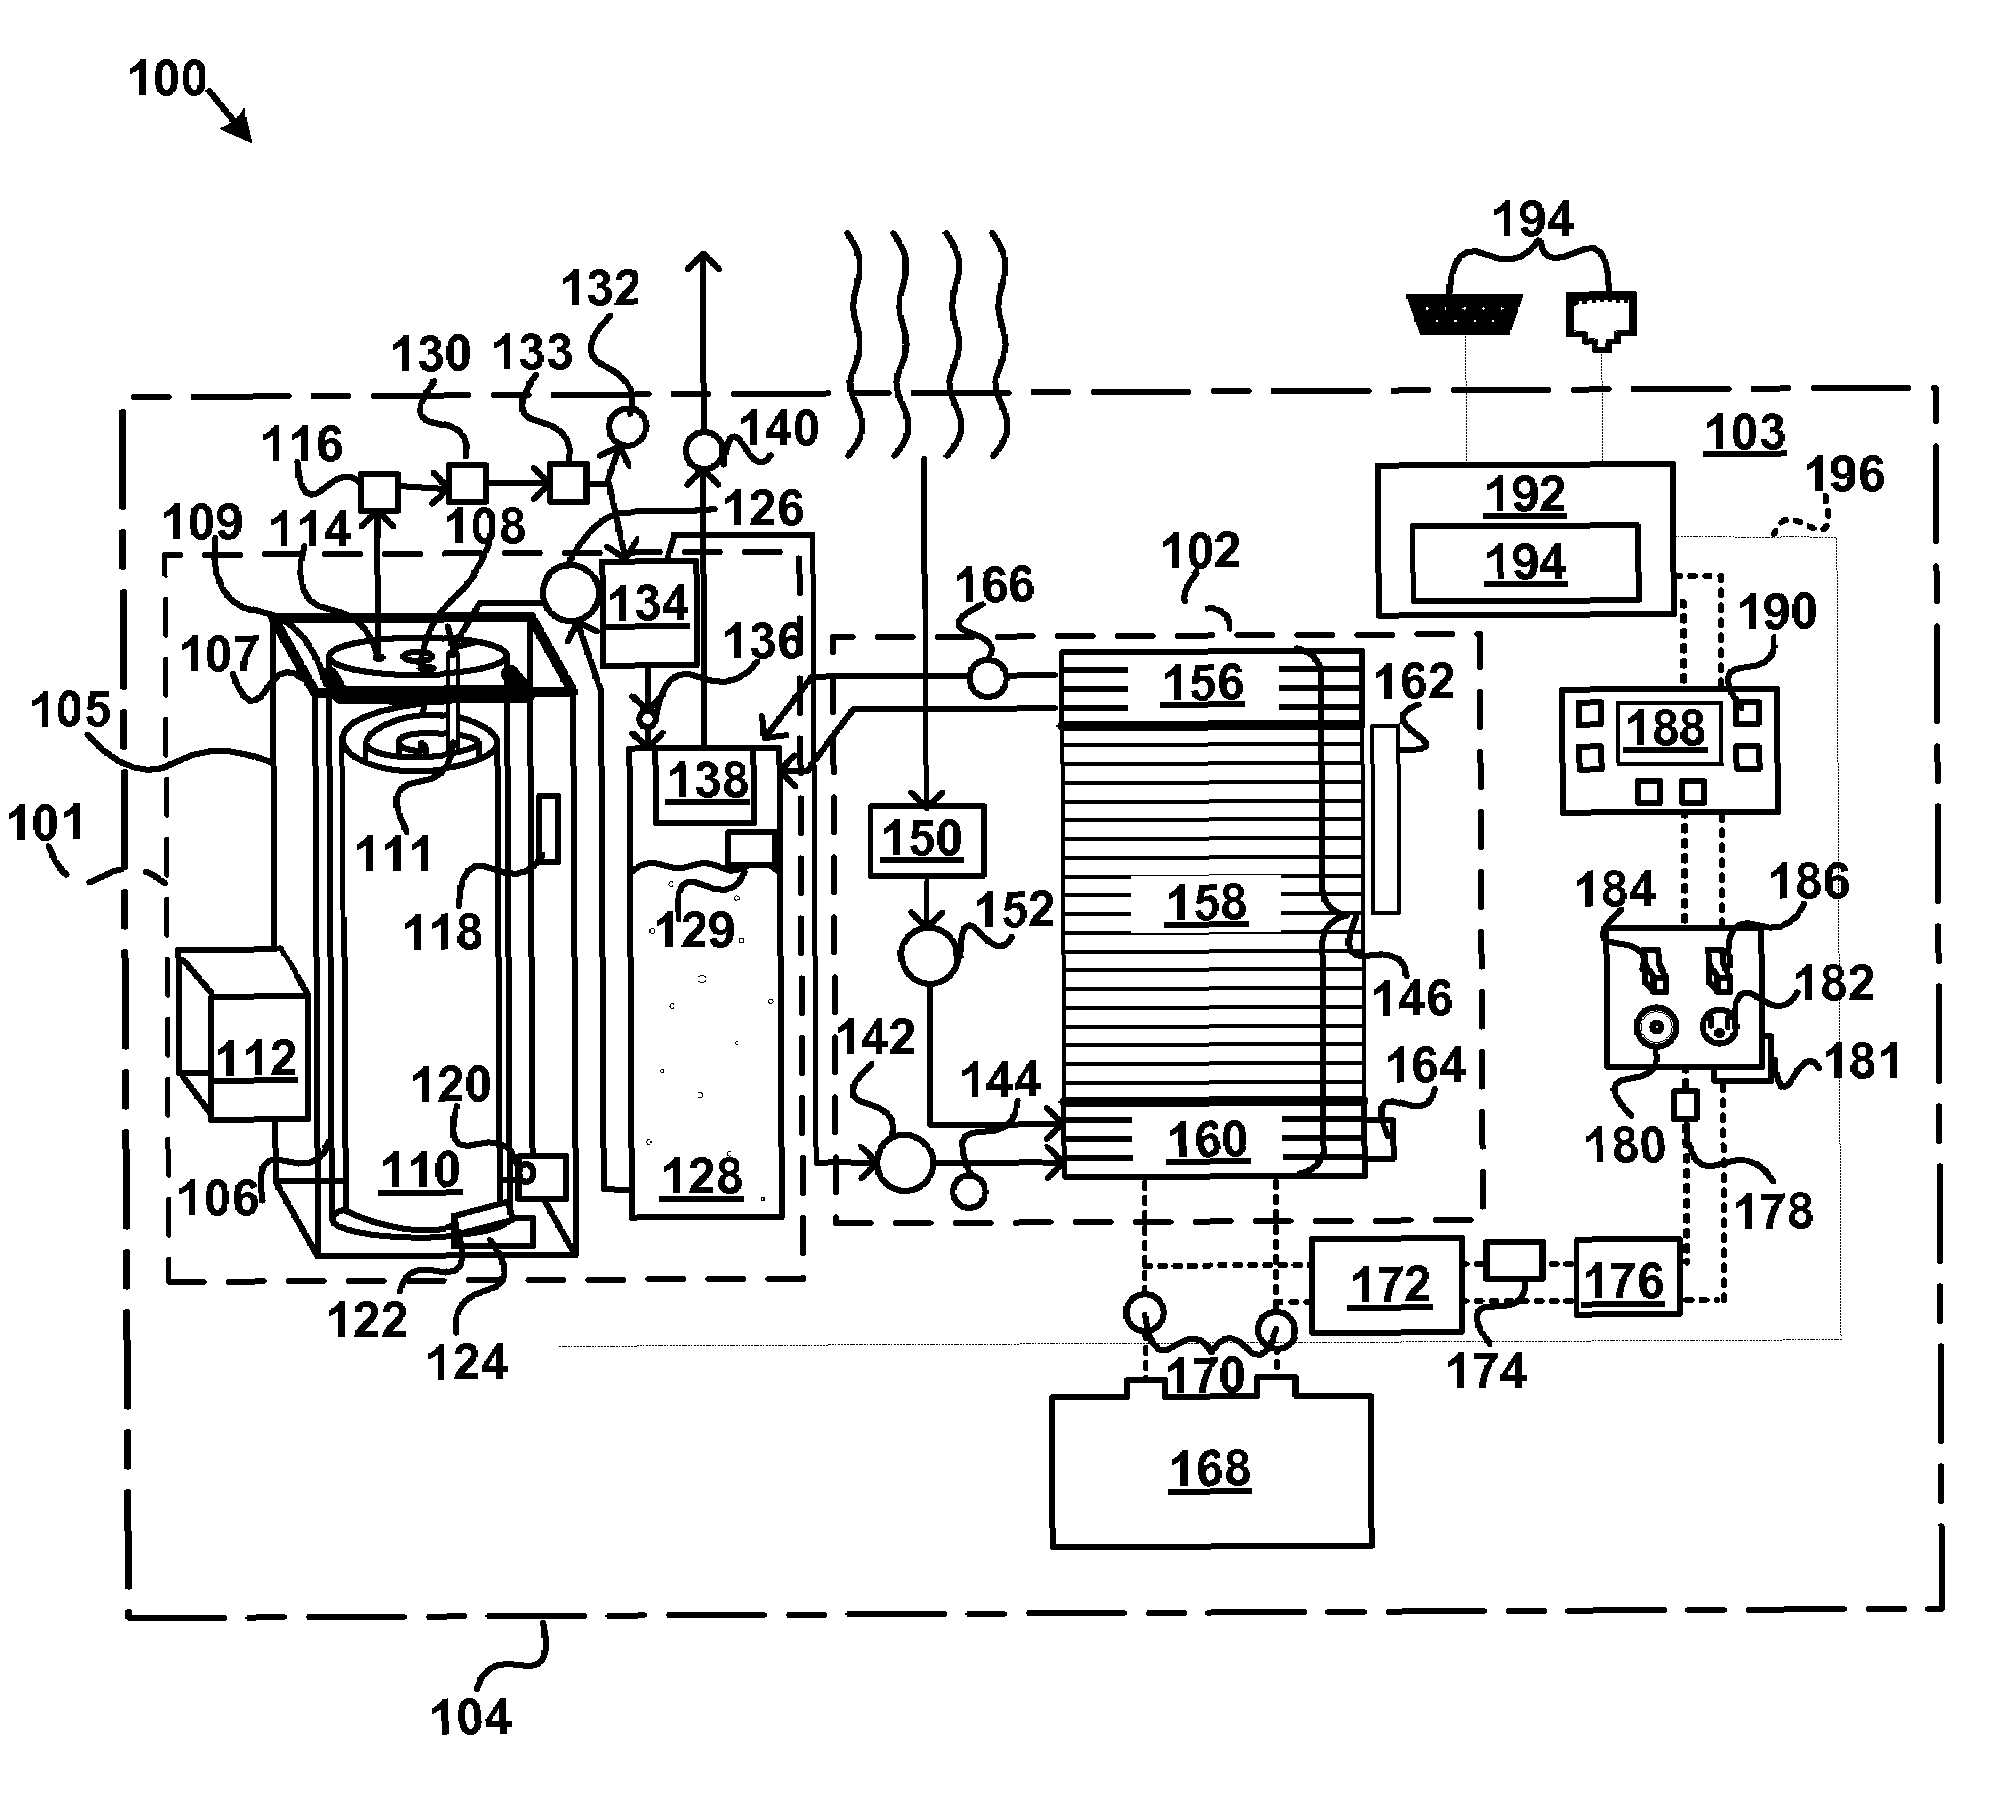 System for generating hydrogen from a chemical hydride